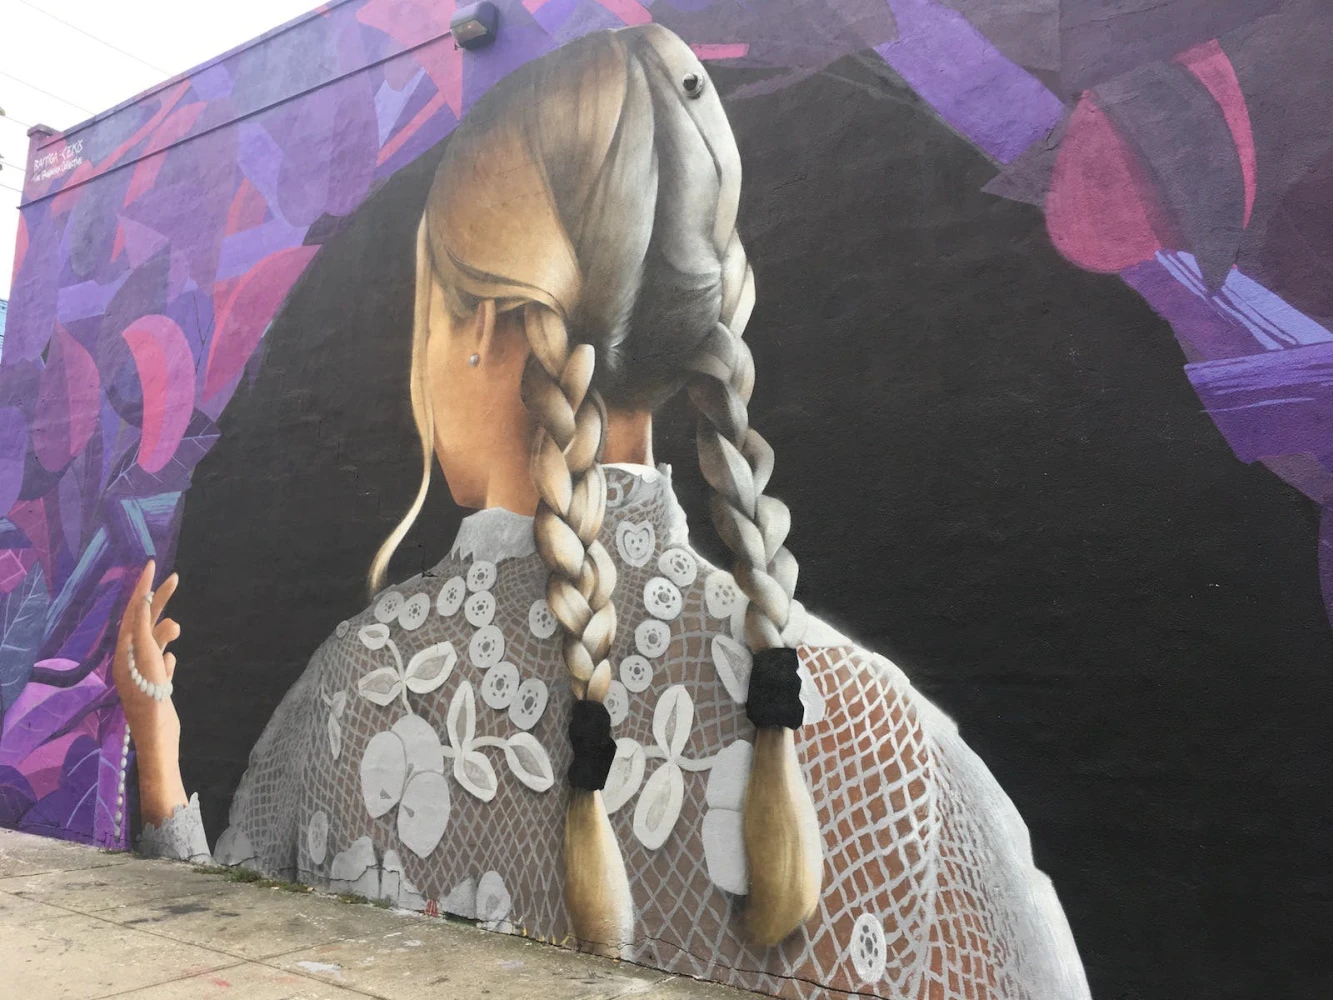 Street Art Pilgrimage in Bushwick: What to expect - 4